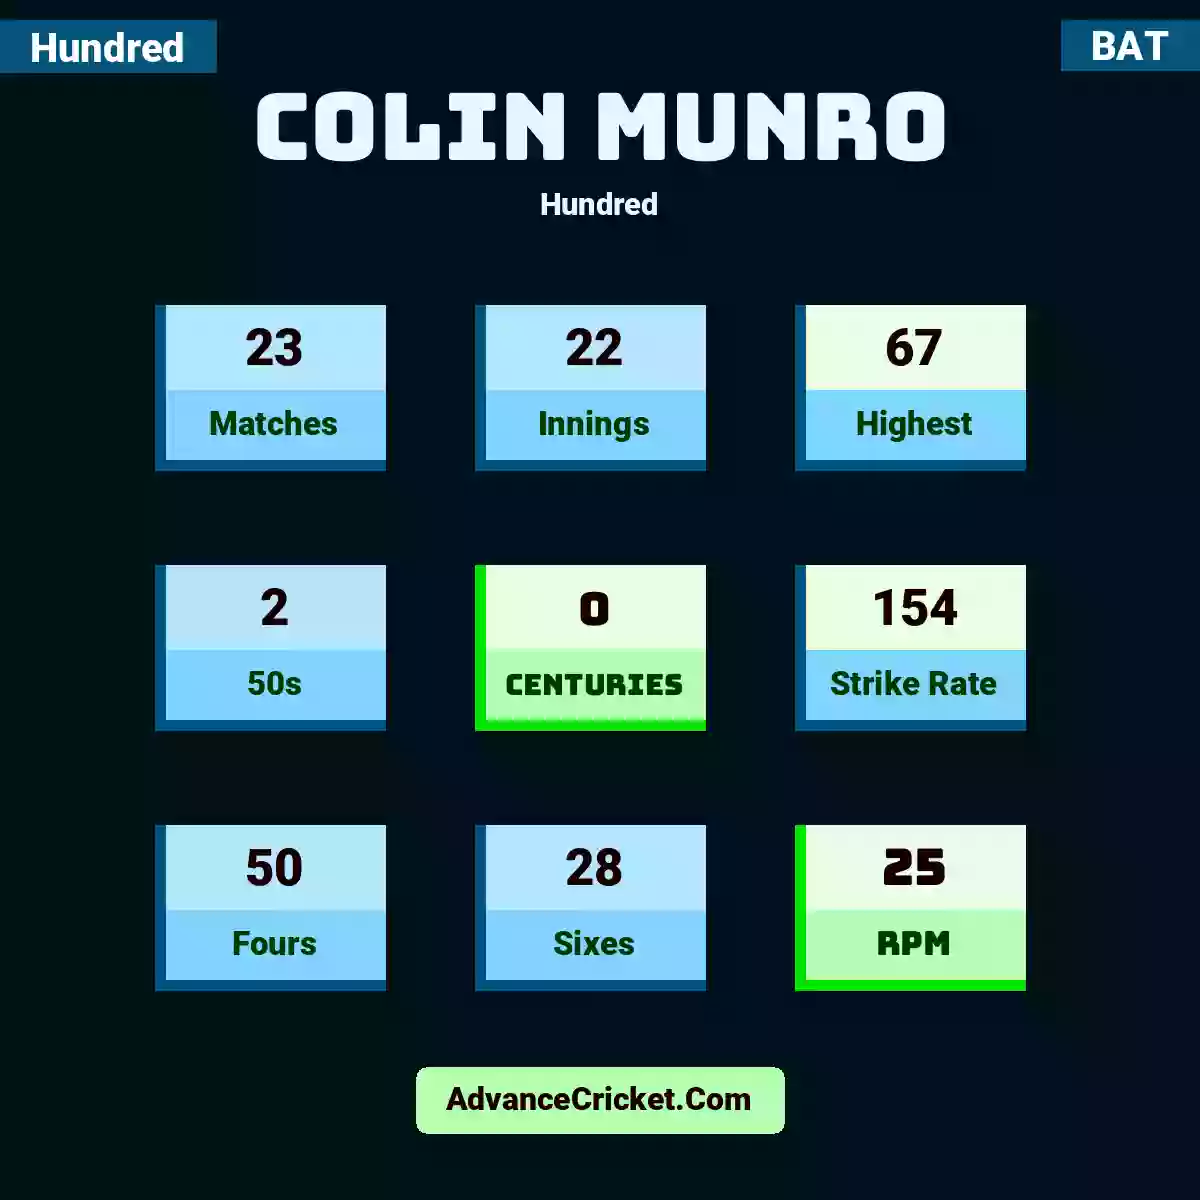 Colin Munro Hundred , Colin Munro played 23 matches, scored 67 runs as highest, 2 half-centuries, and 0 centuries, with a strike rate of 154. C.Munro hit 50 fours and 28 sixes, with an RPM of 25.